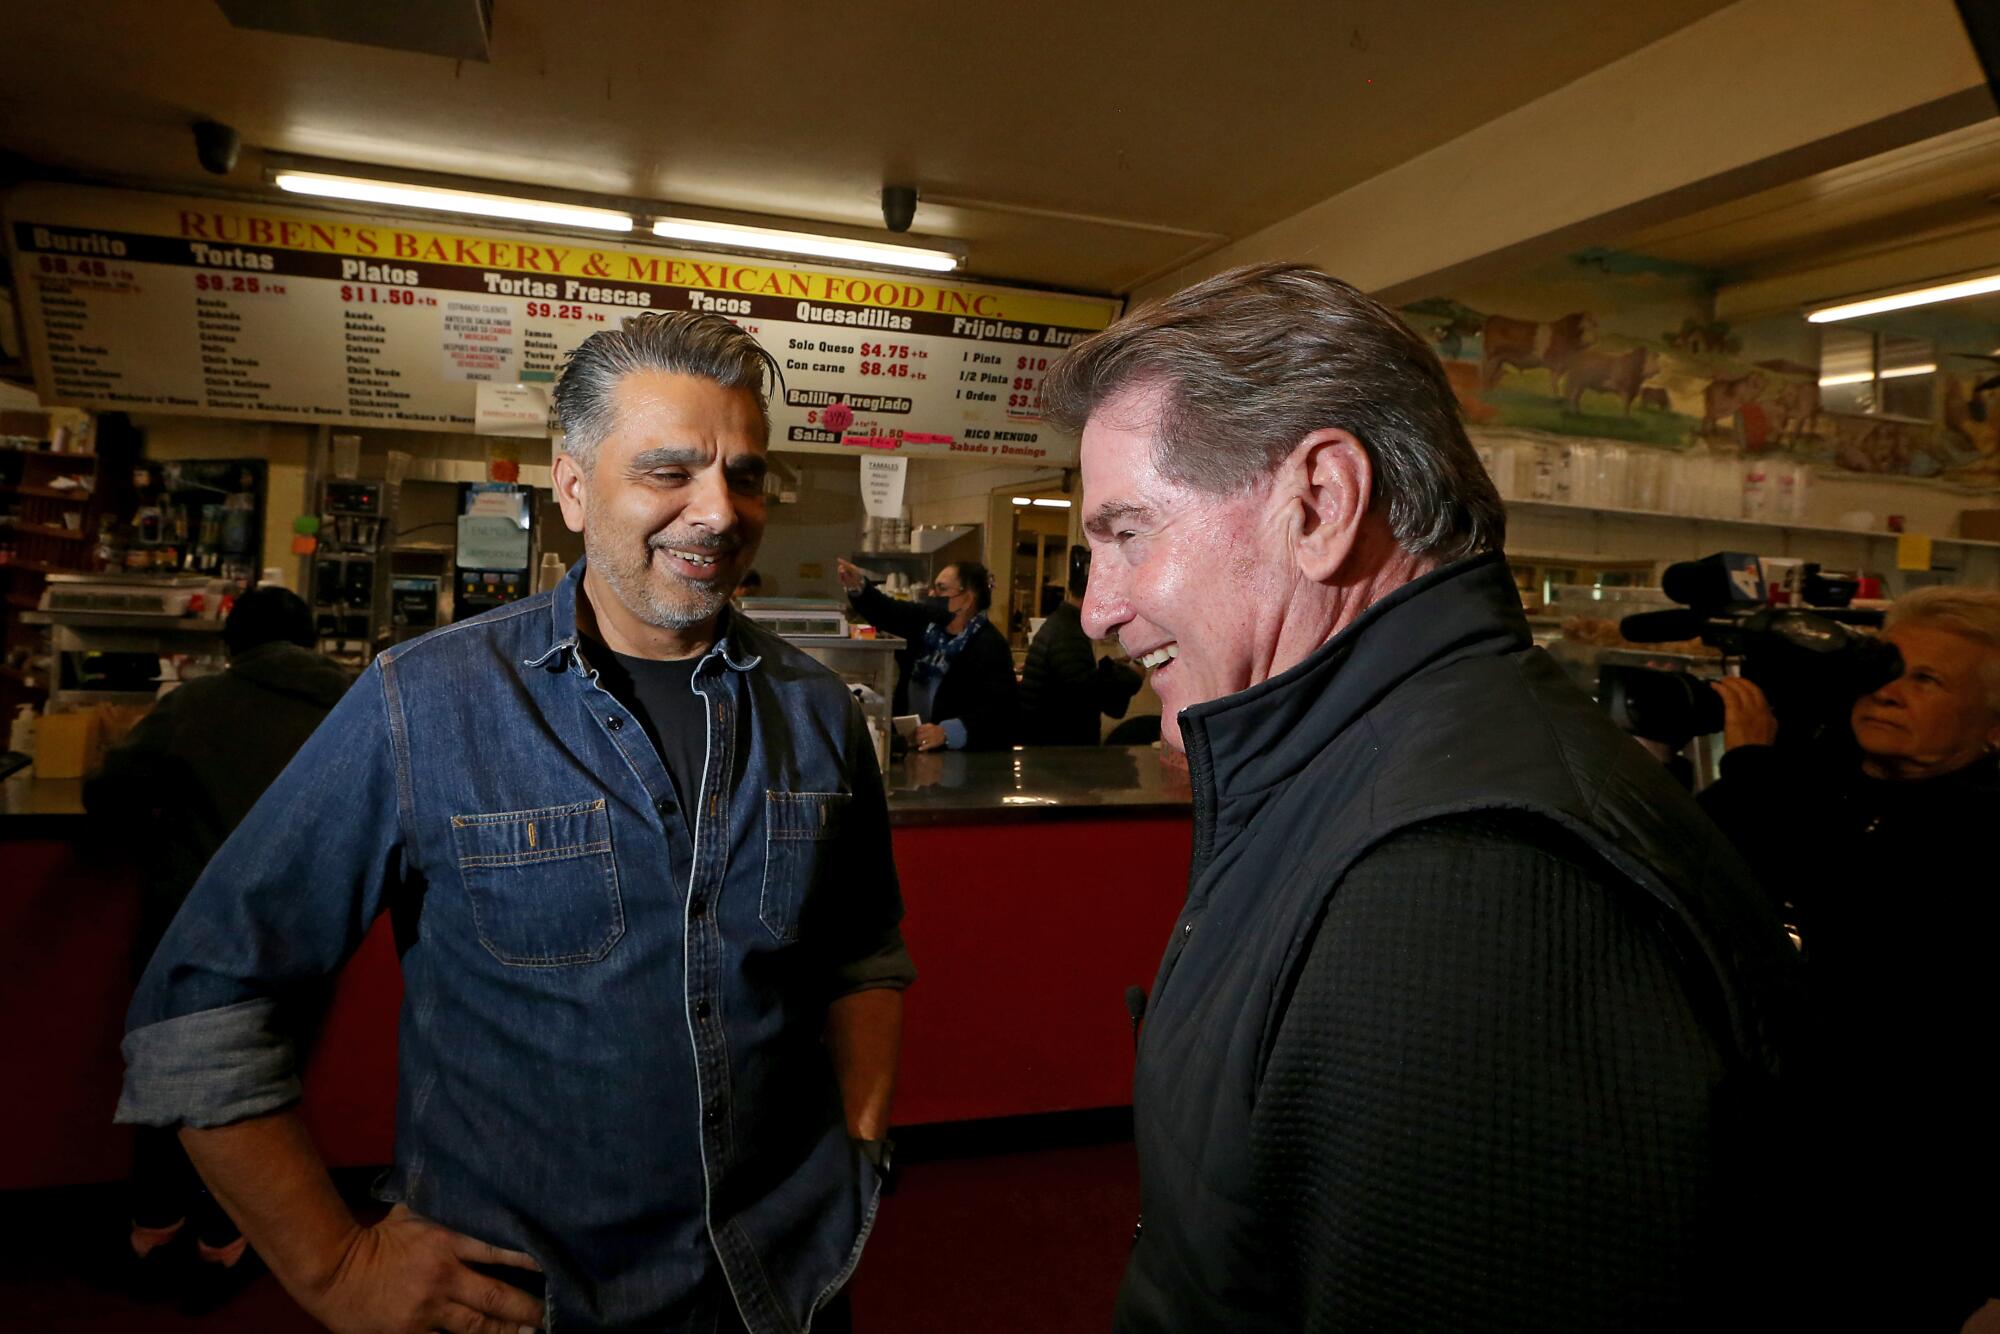 Dodgers and Padres great Steve Garvey, right, visits Ruben Ramirez Jr., who runs Ruben's Bakery and Mexican Food in Compton.